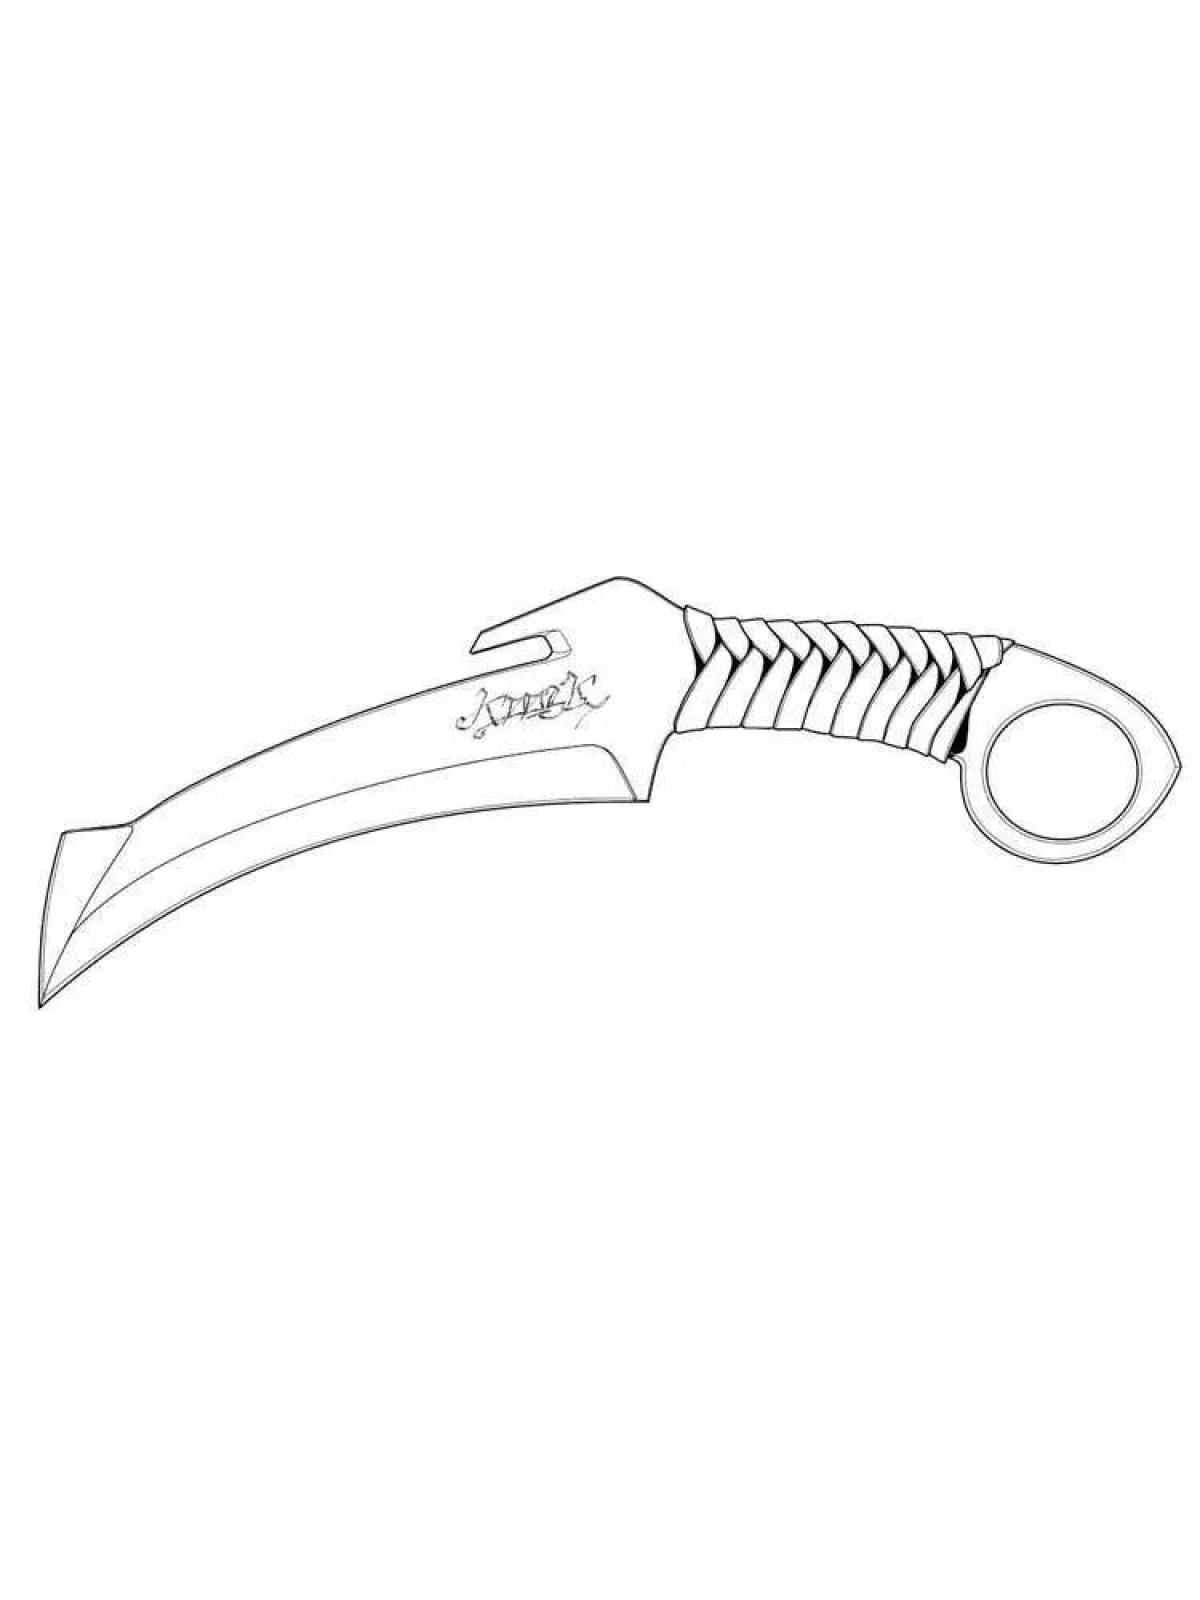 Coloring book gorgeous karambit knife from standoff 2